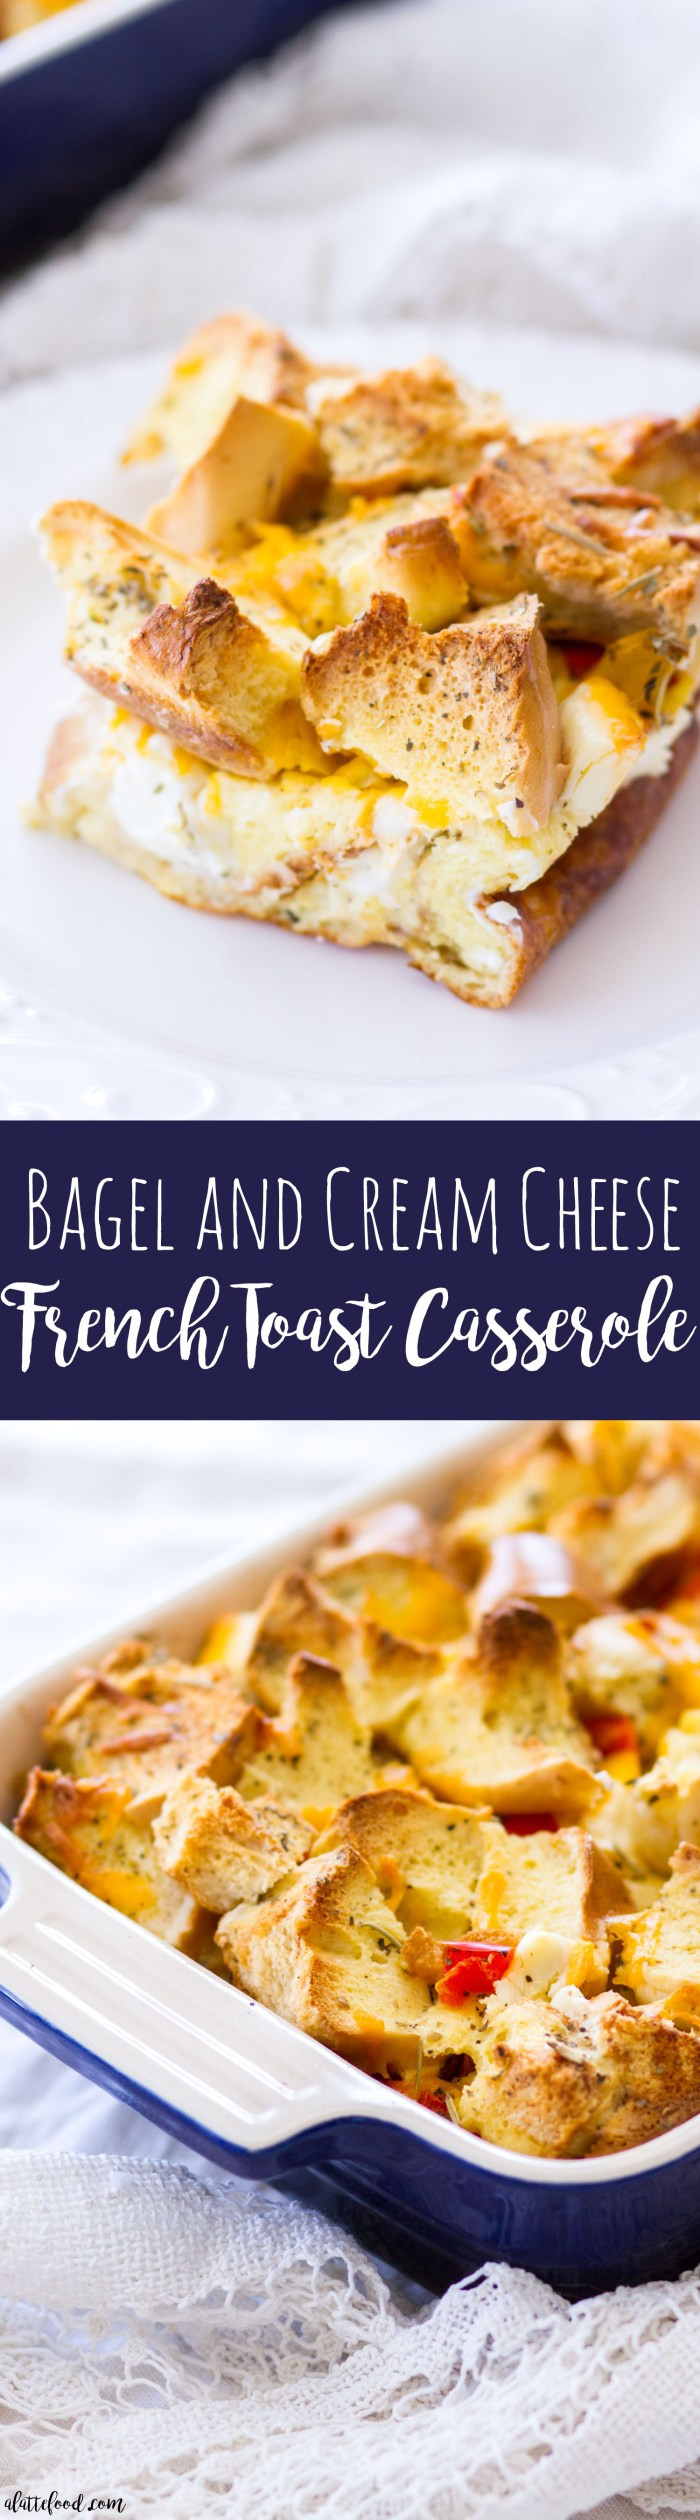 Bagel French Toast Casserole
 Savory Bagel and Cream Cheese French Toast Casserole